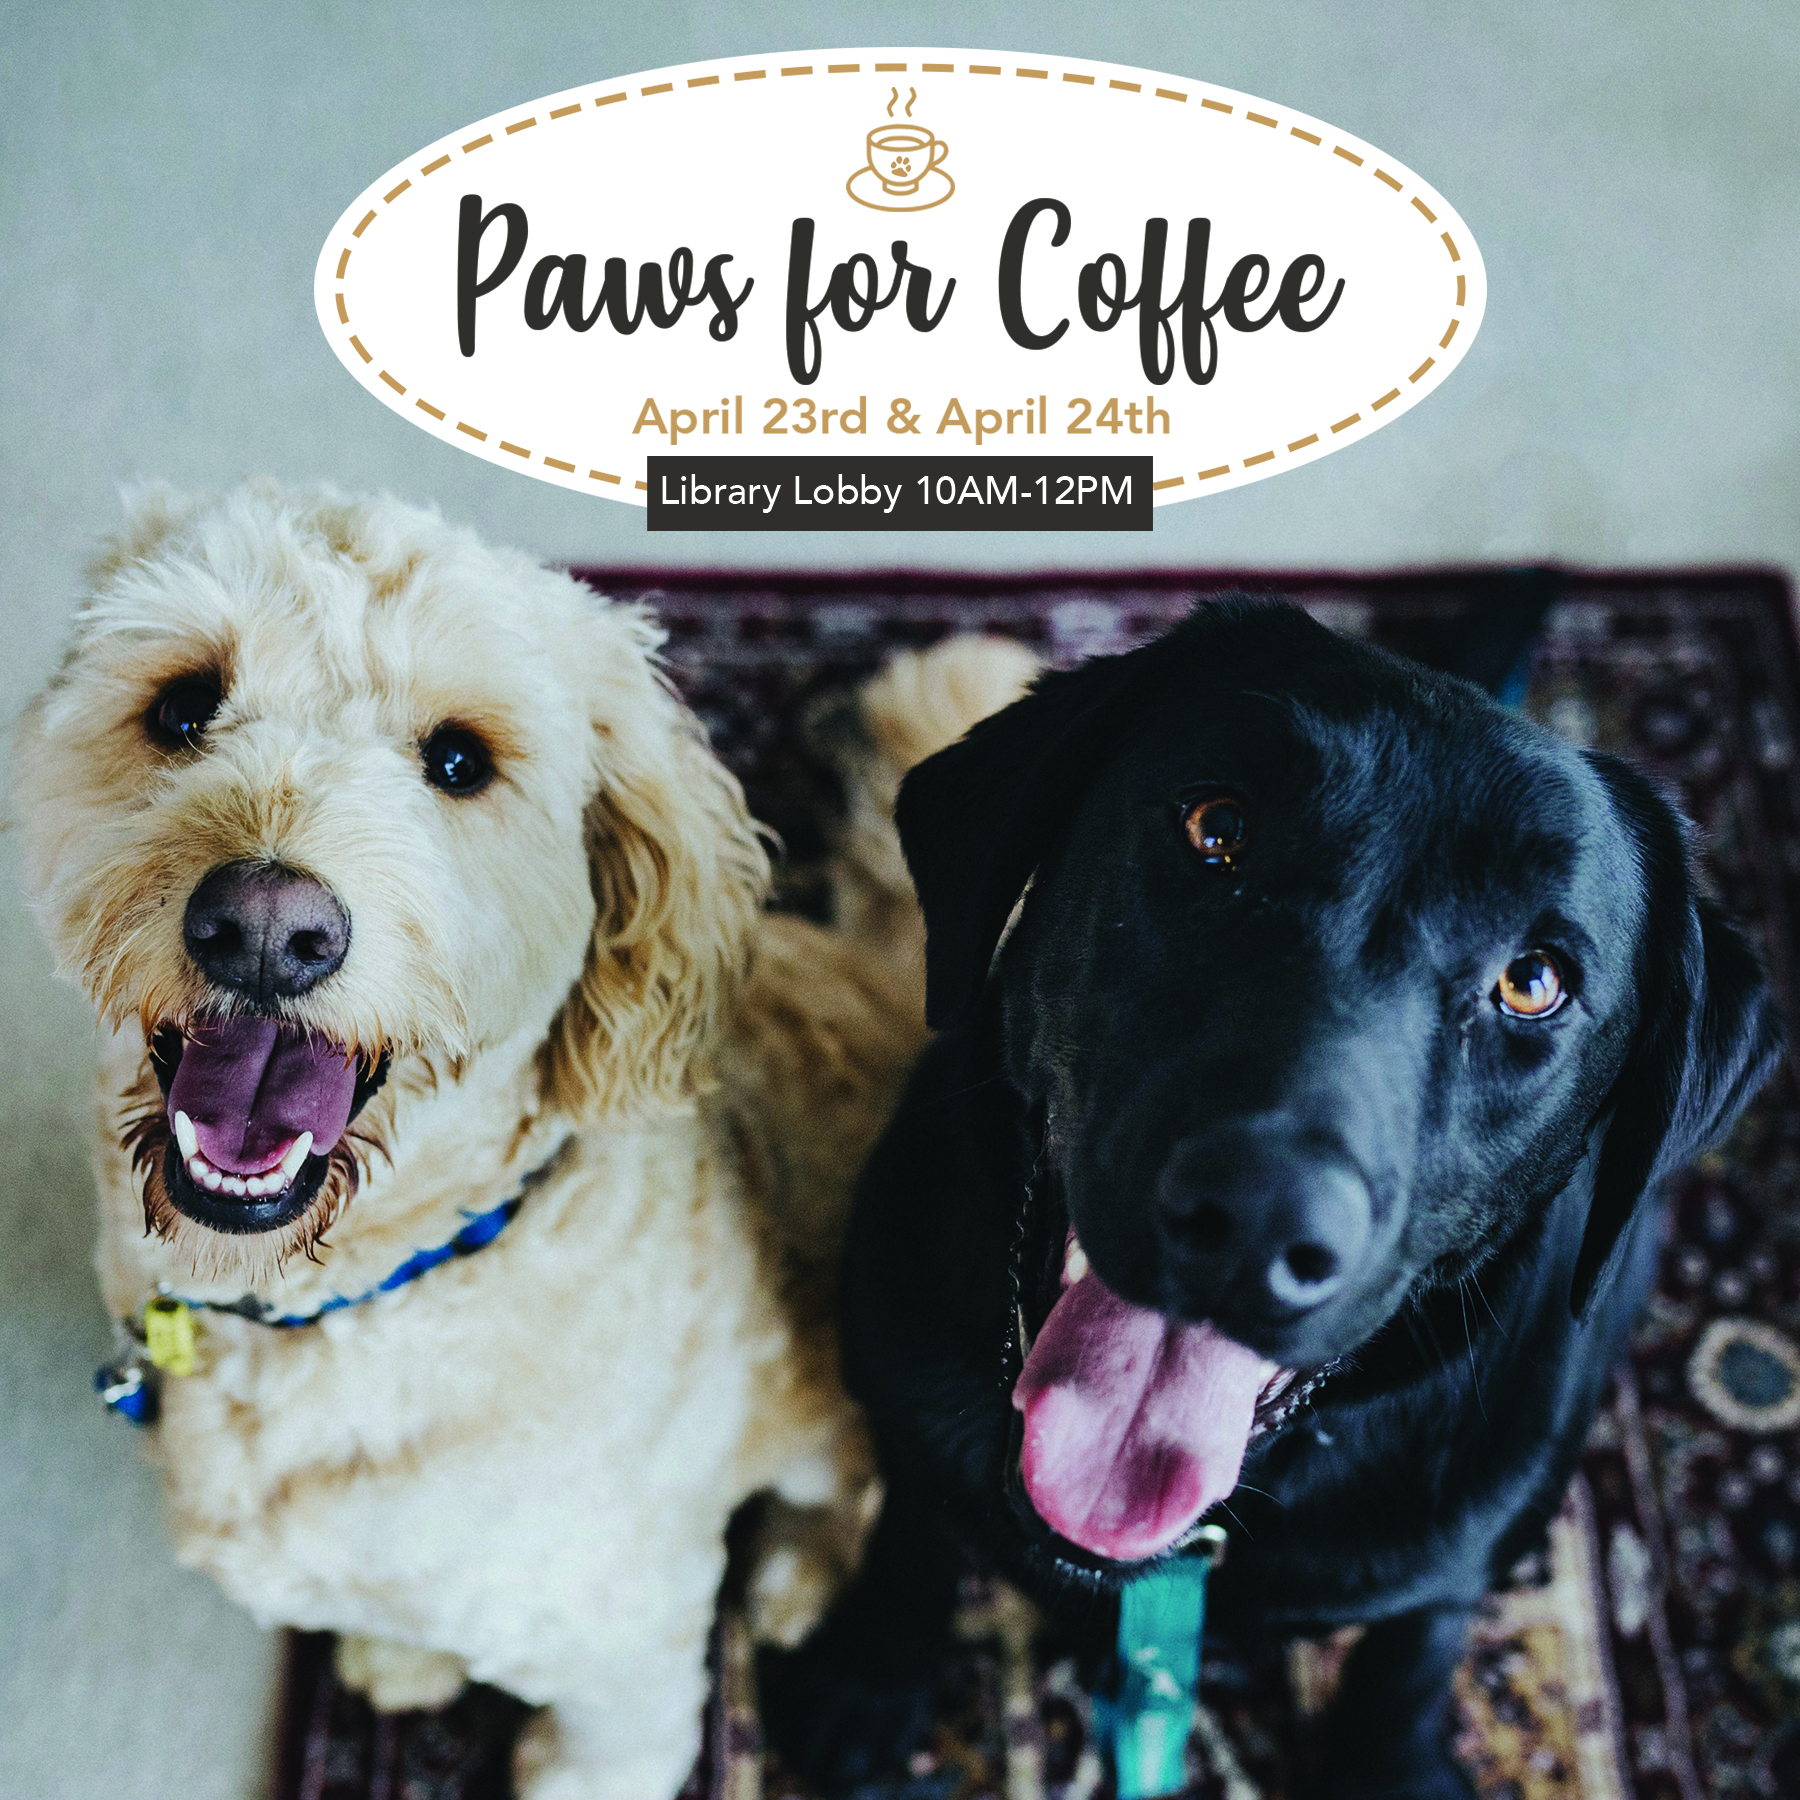 Flier for Paws for Coffee with a photo of a black dog and a white dog. The flier gives the time and date of the event